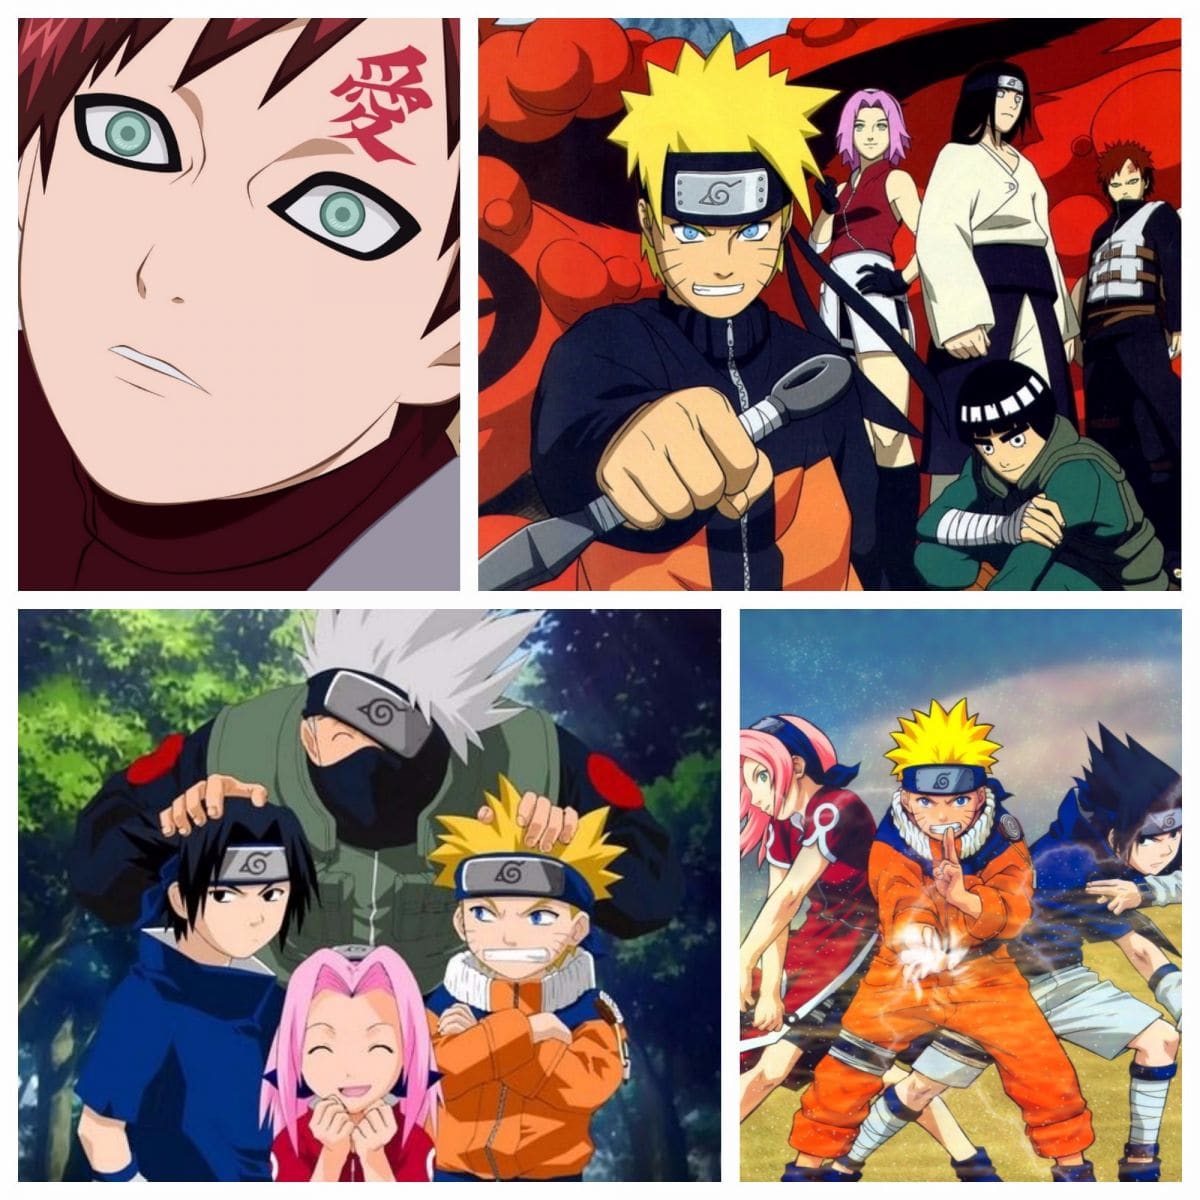 naruto shippuden episodes english subbed torrent download